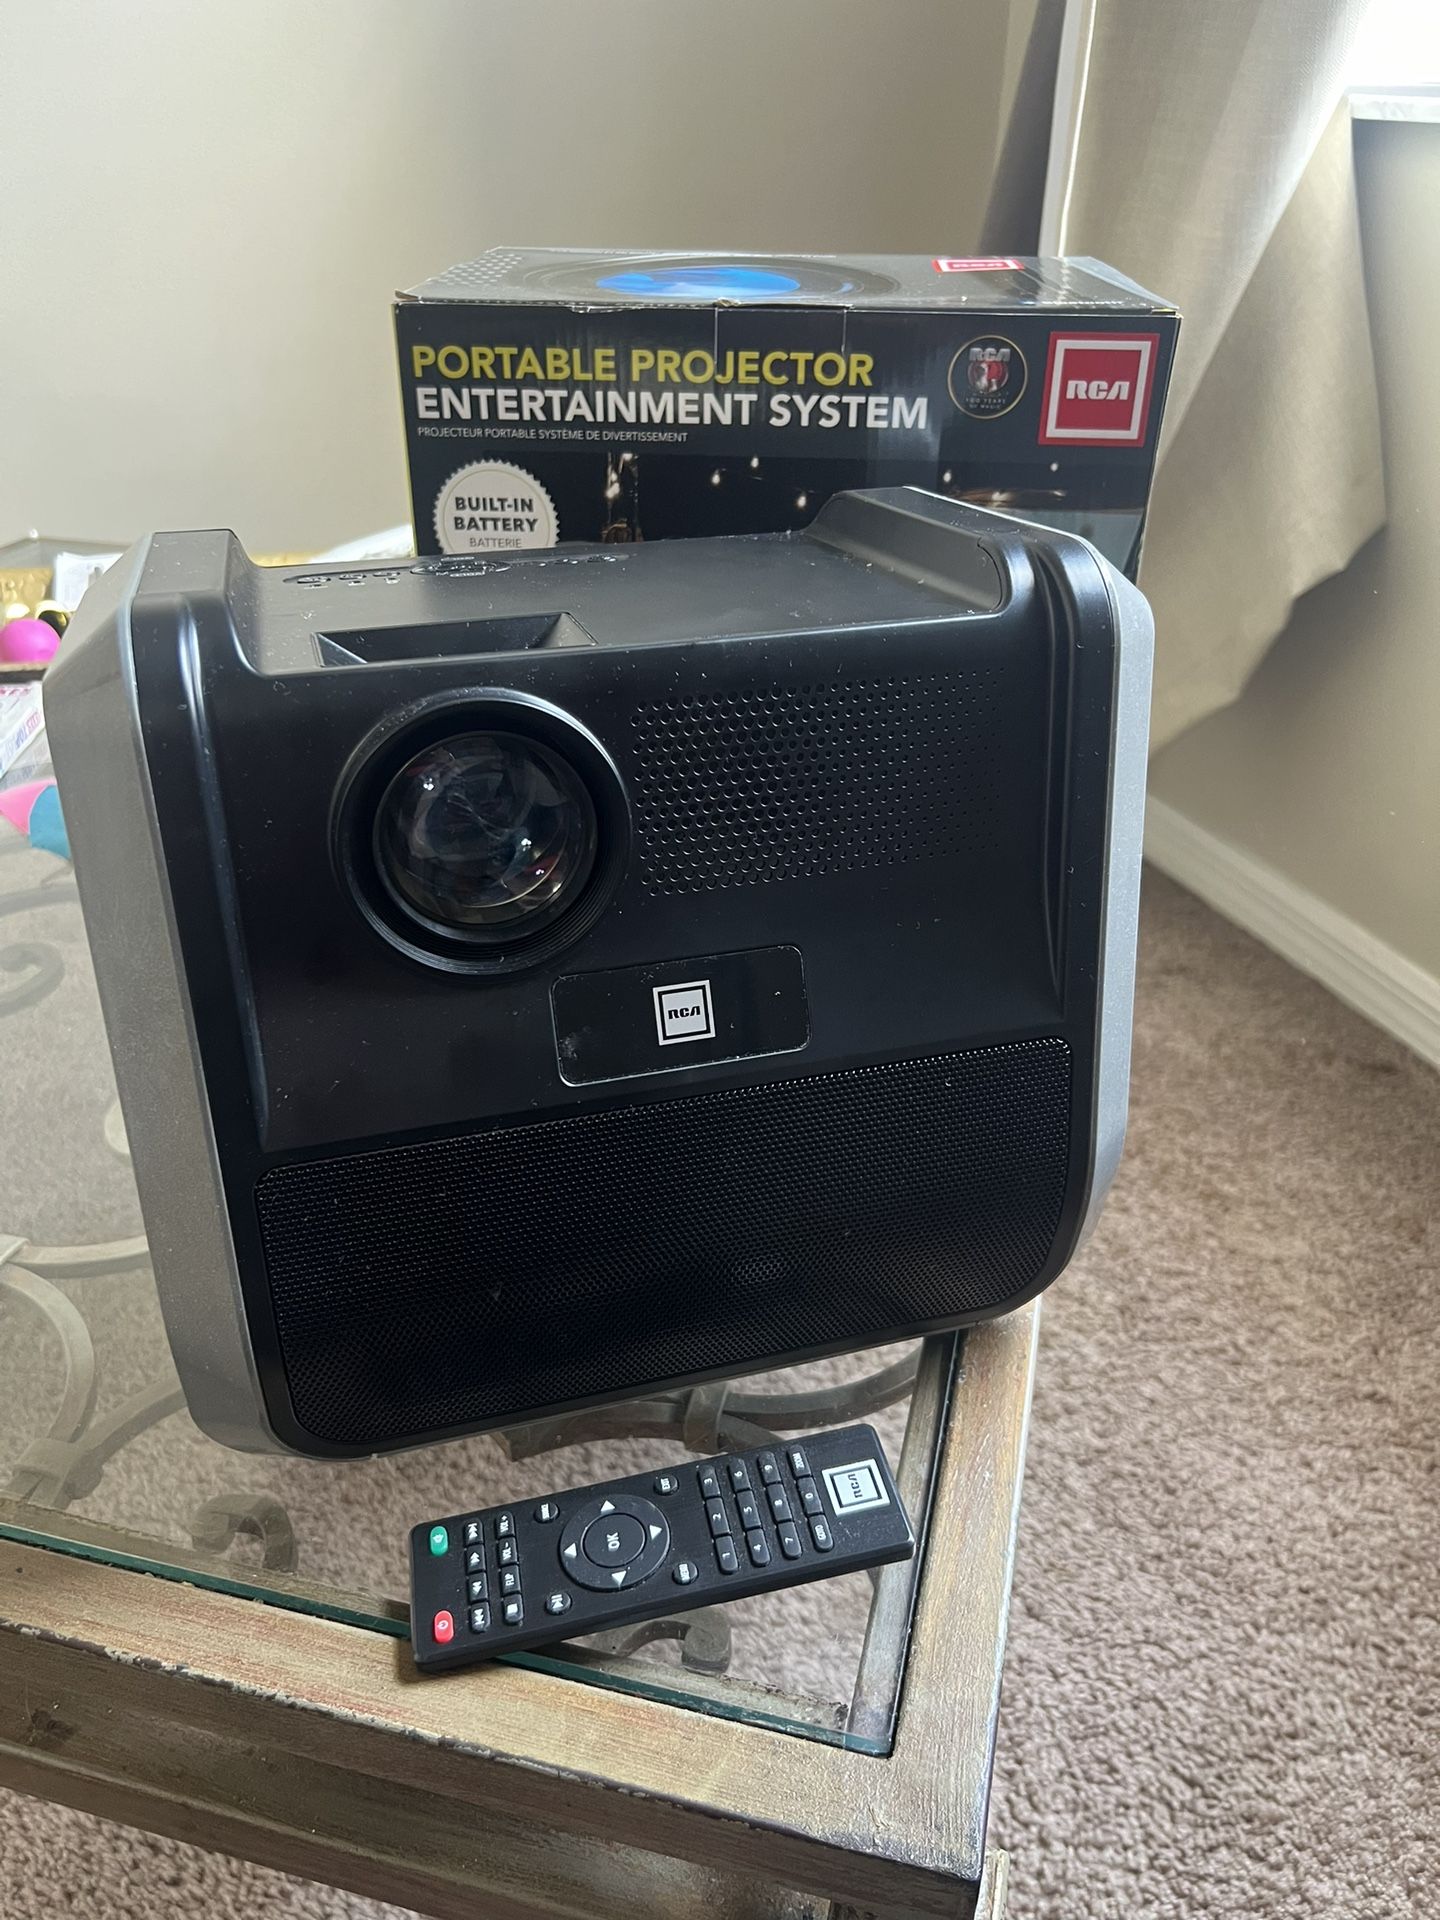 RCA Portable Projector Entertainment System